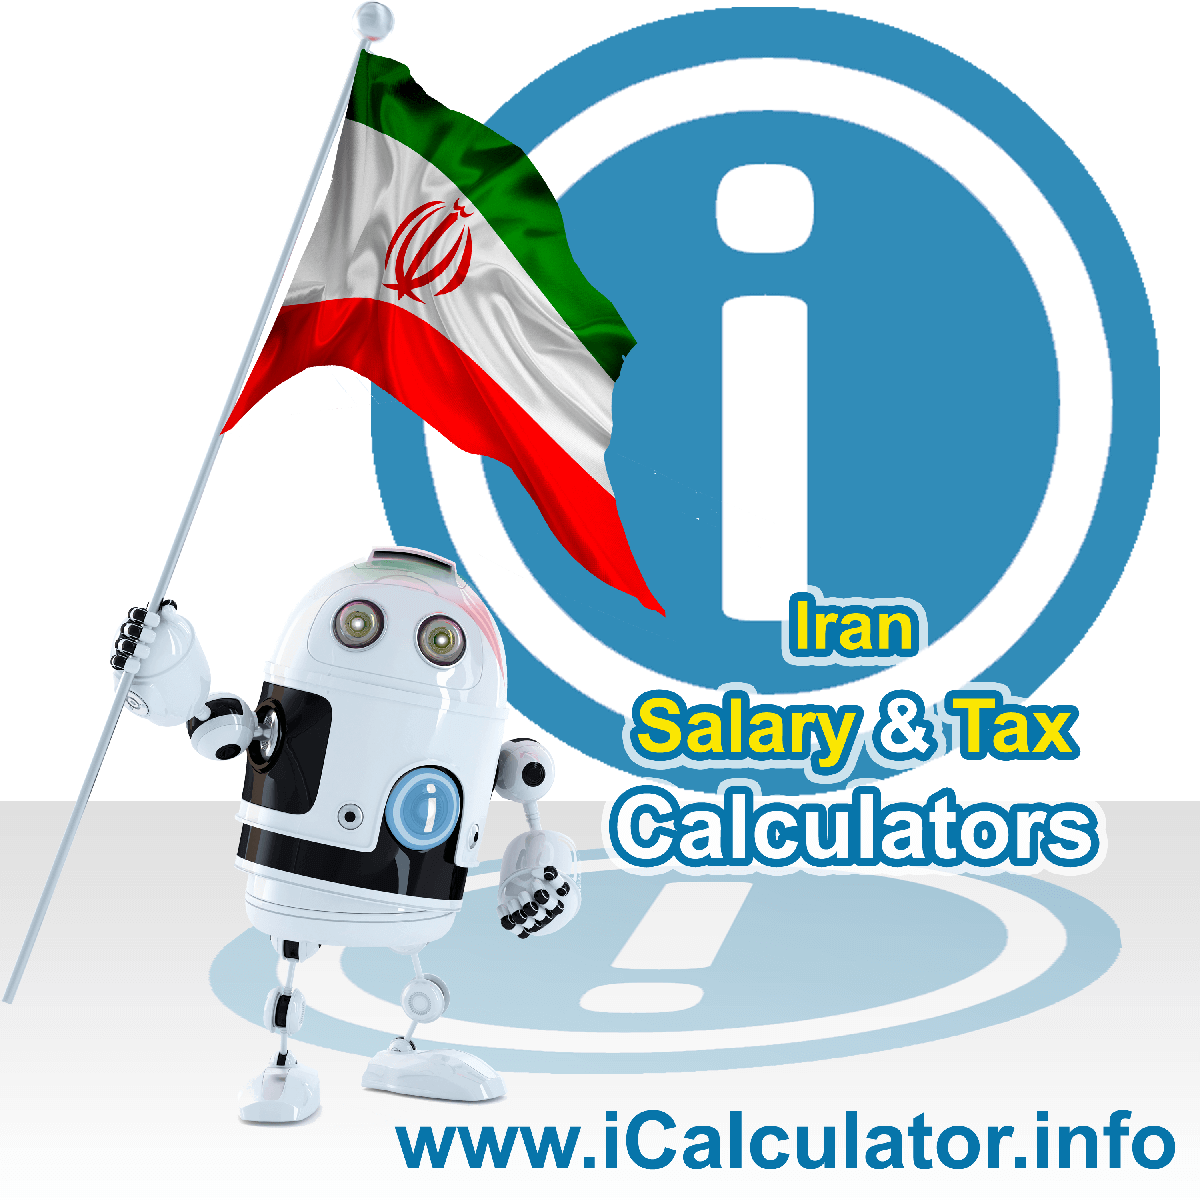 Iran Tax Calculator. This image shows the Iran flag and information relating to the tax formula for the Iran Salary Calculator